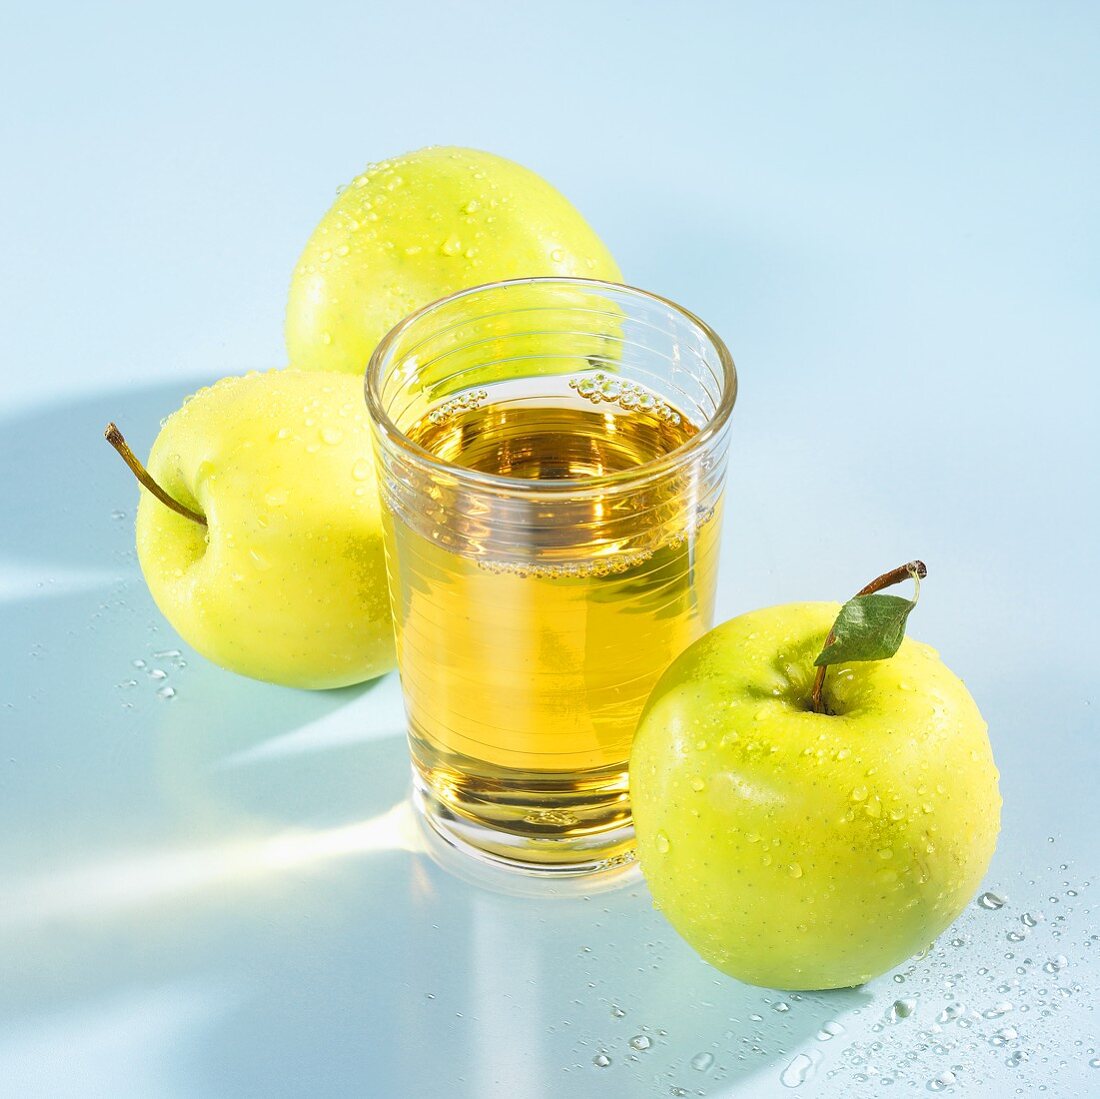 A glass of apple juice with apples beside it